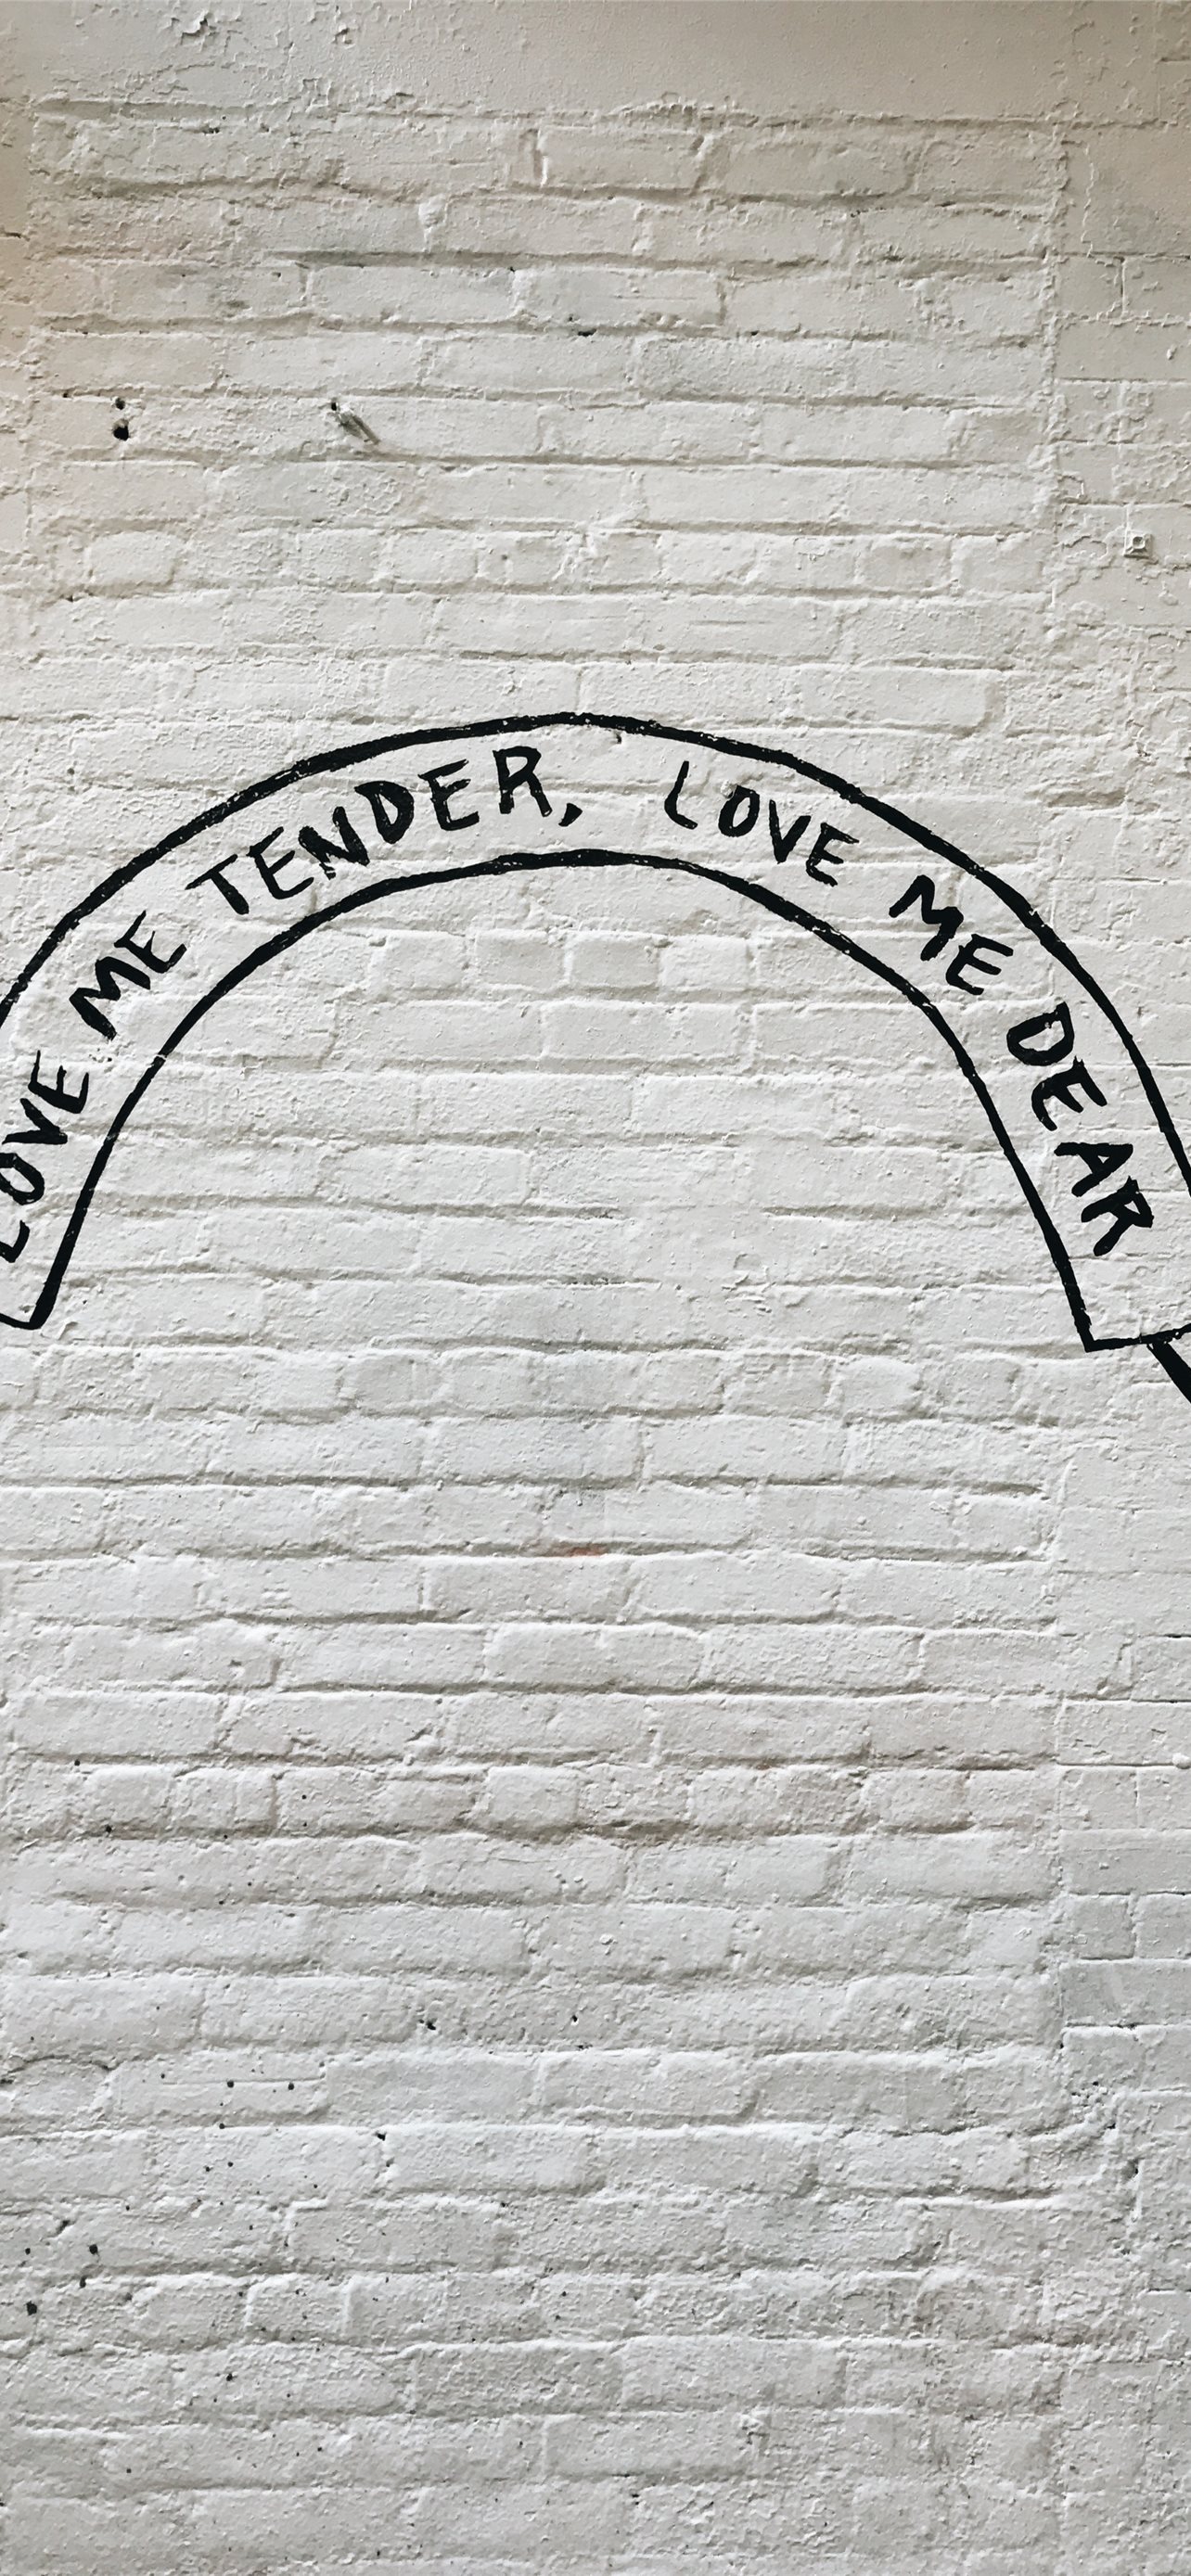 Love me tender love me dear wall quotes iphone wallpapers free download